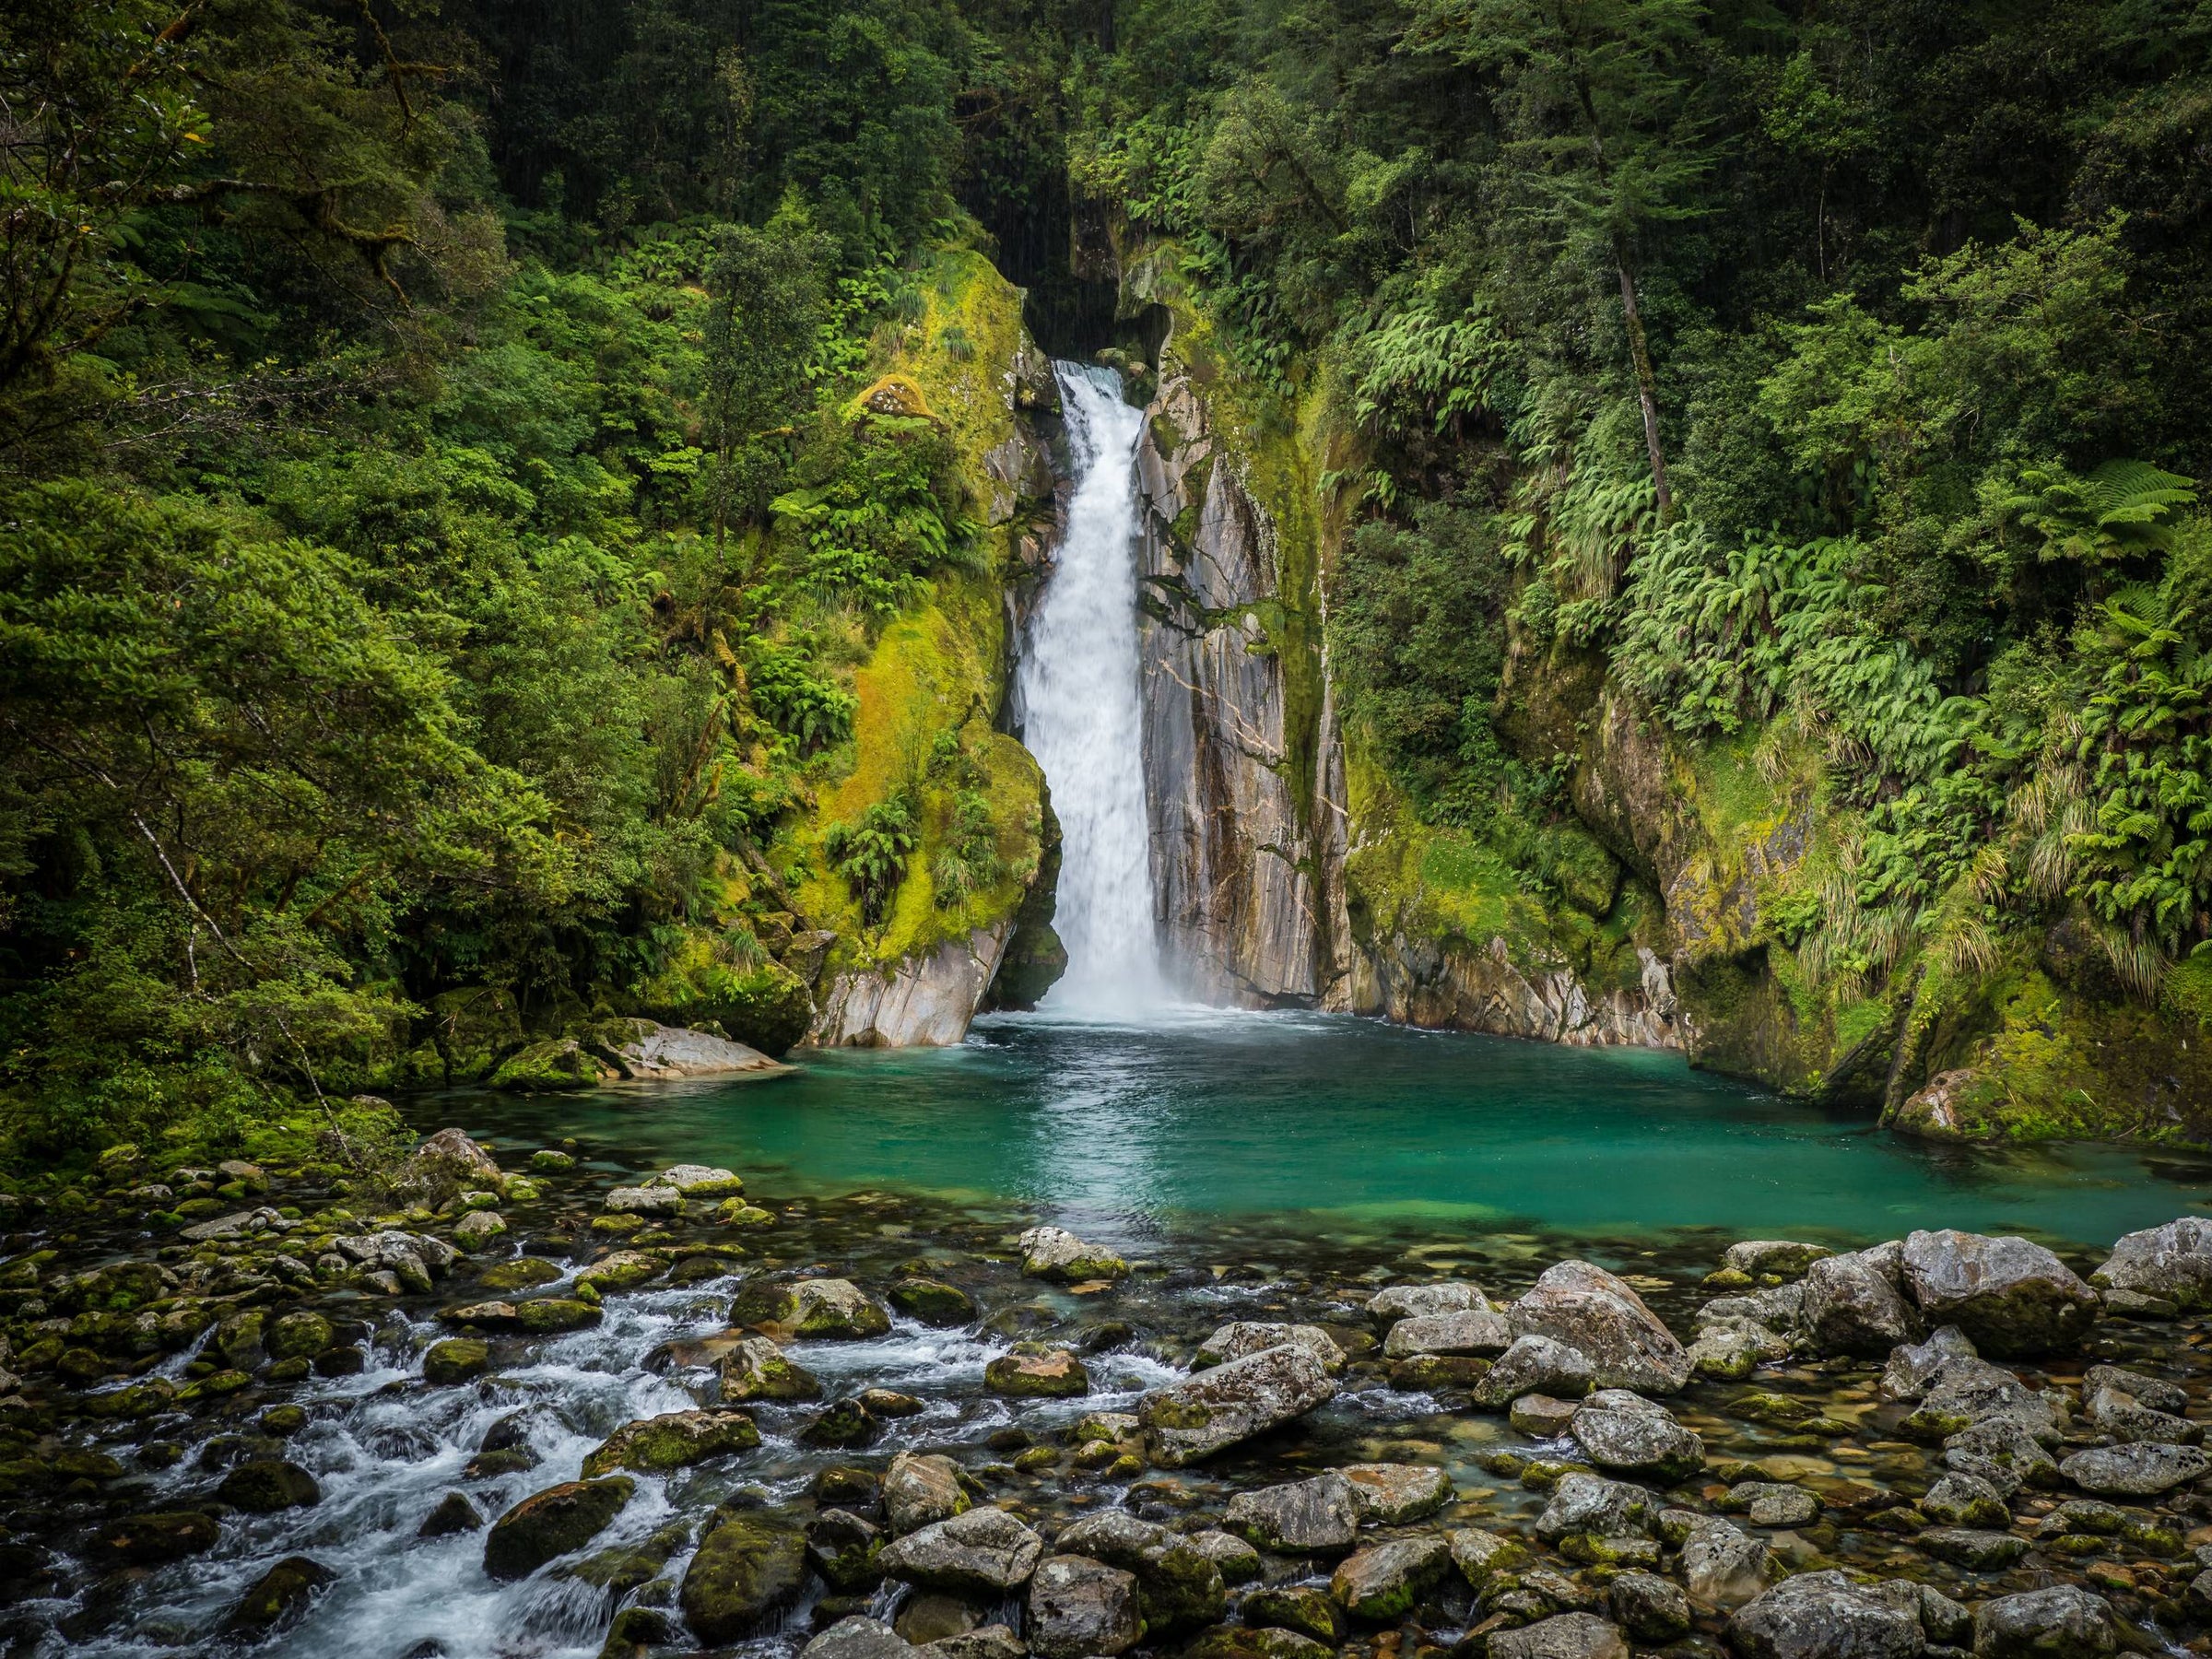 Natural waterfall surrounded by native New Zealand moss, fern and other trees and. The water falls into a shallow basin which has a clear turquoise color.   